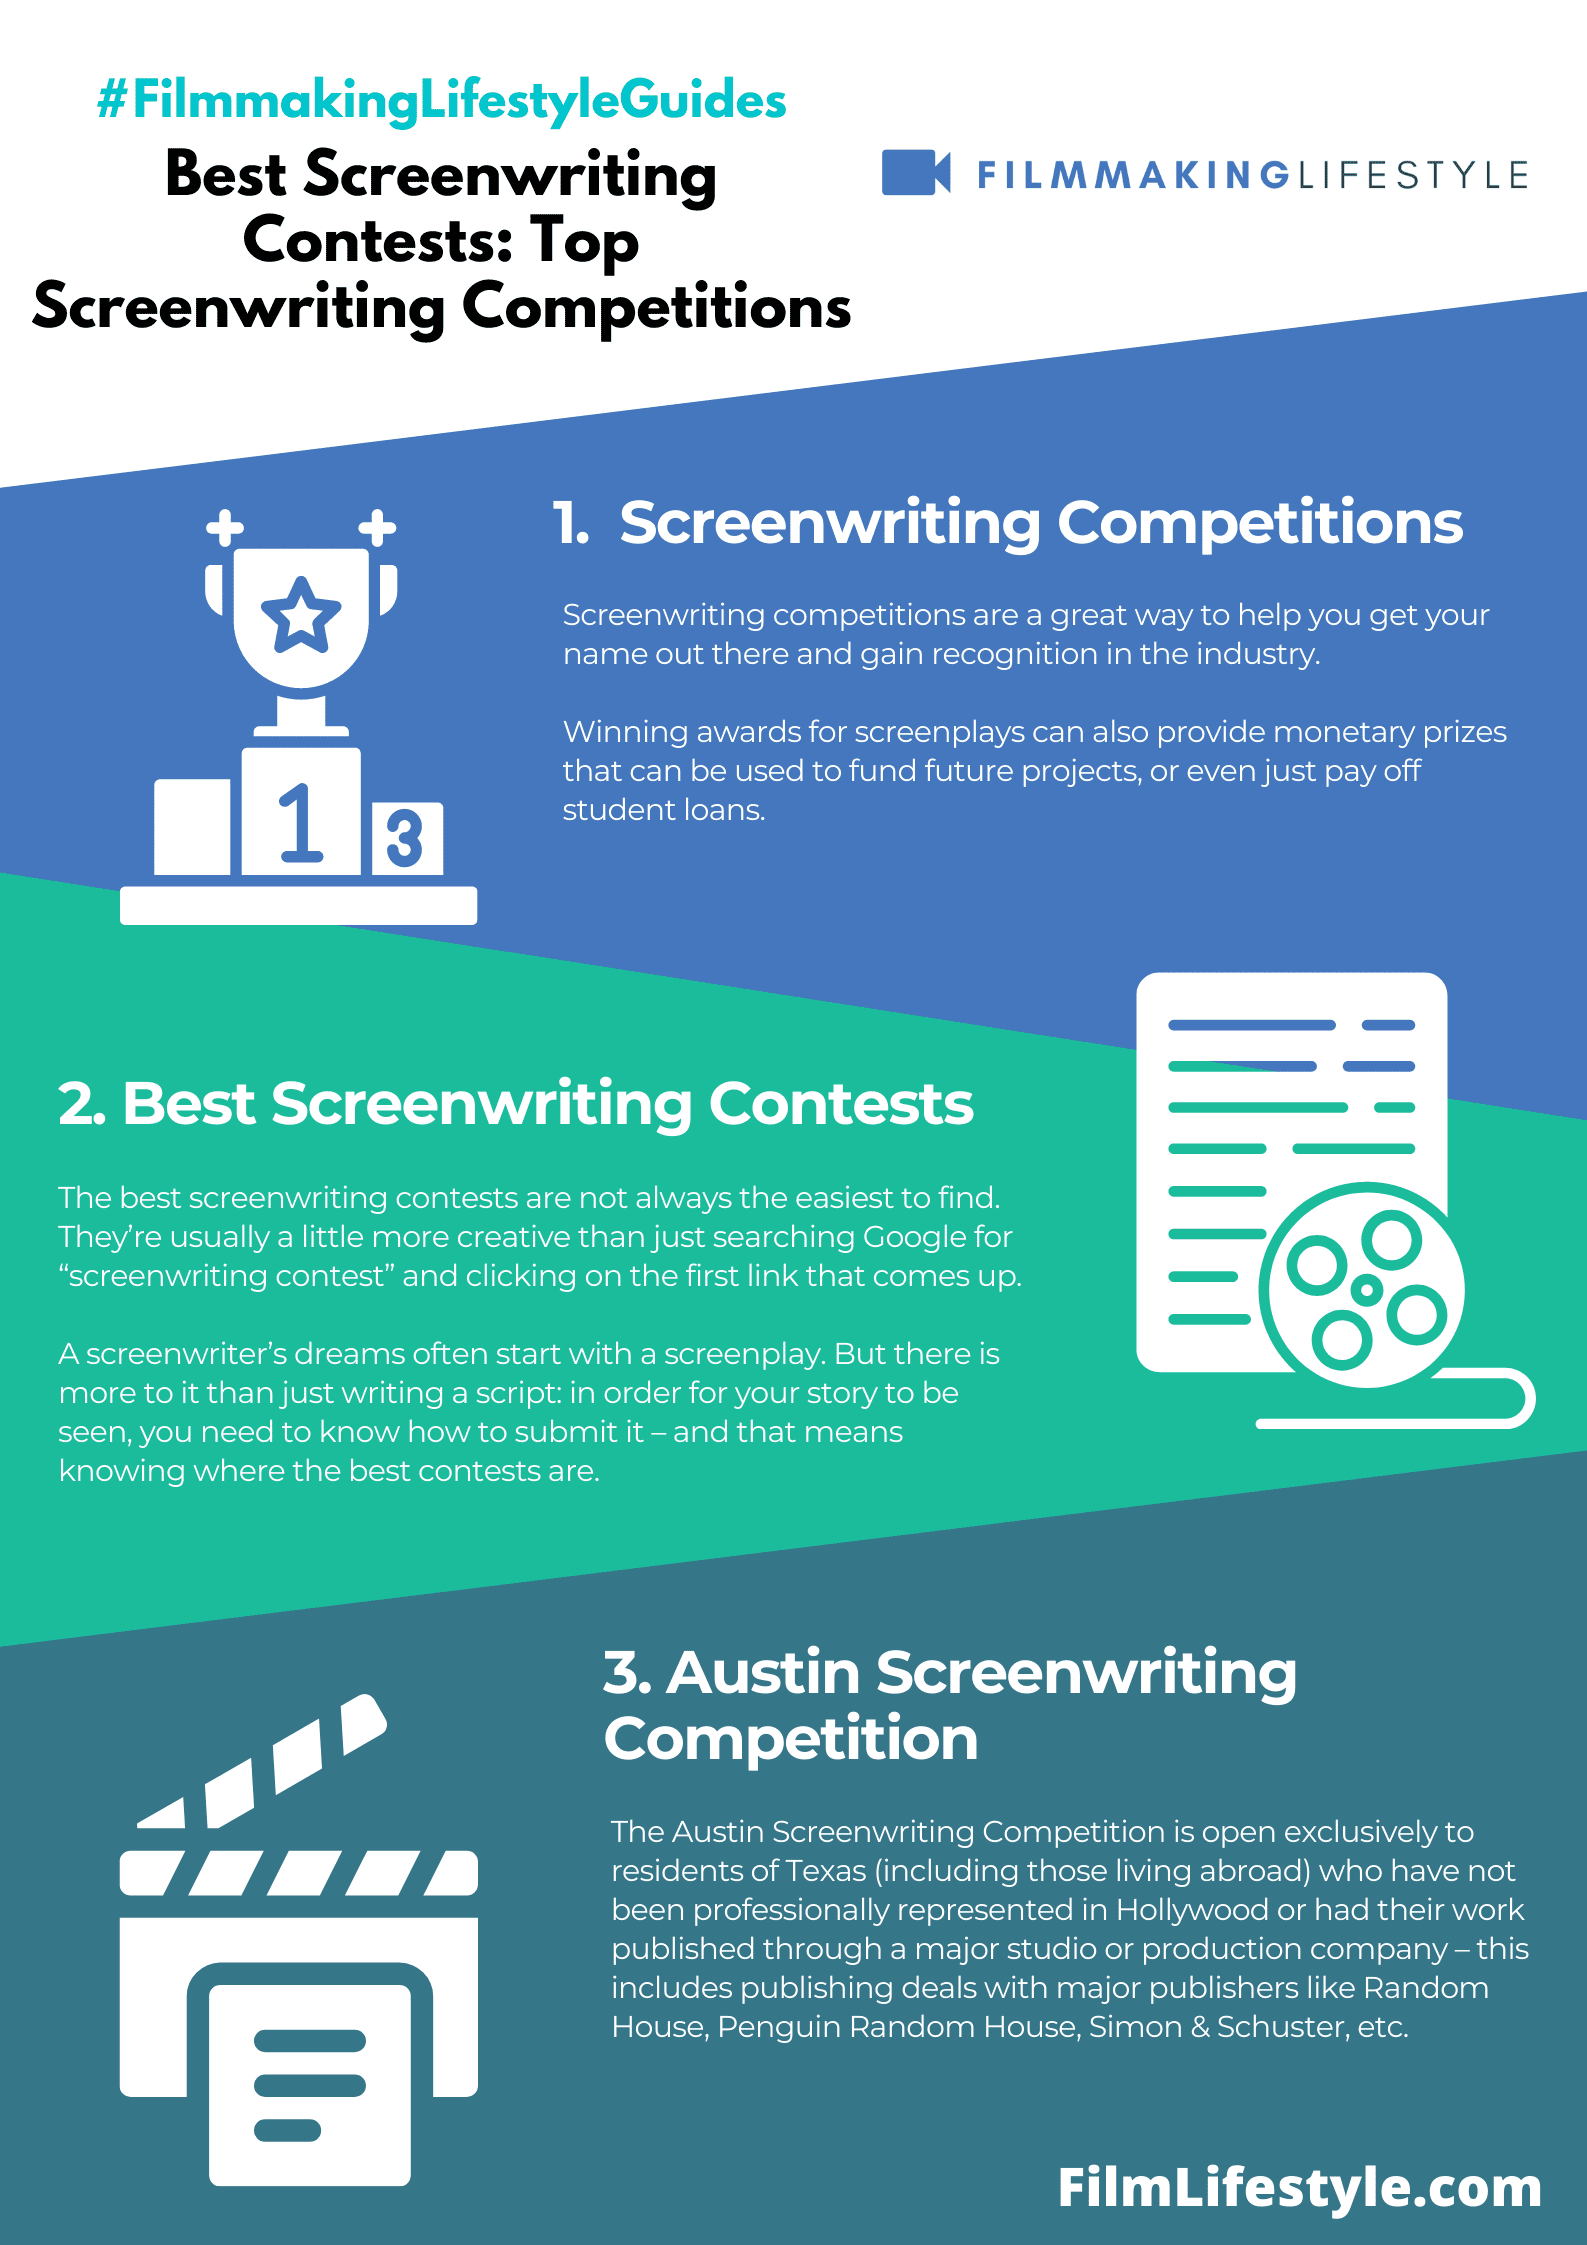 Best Screenwriting Contests 15 Top Screenwriting Competitions